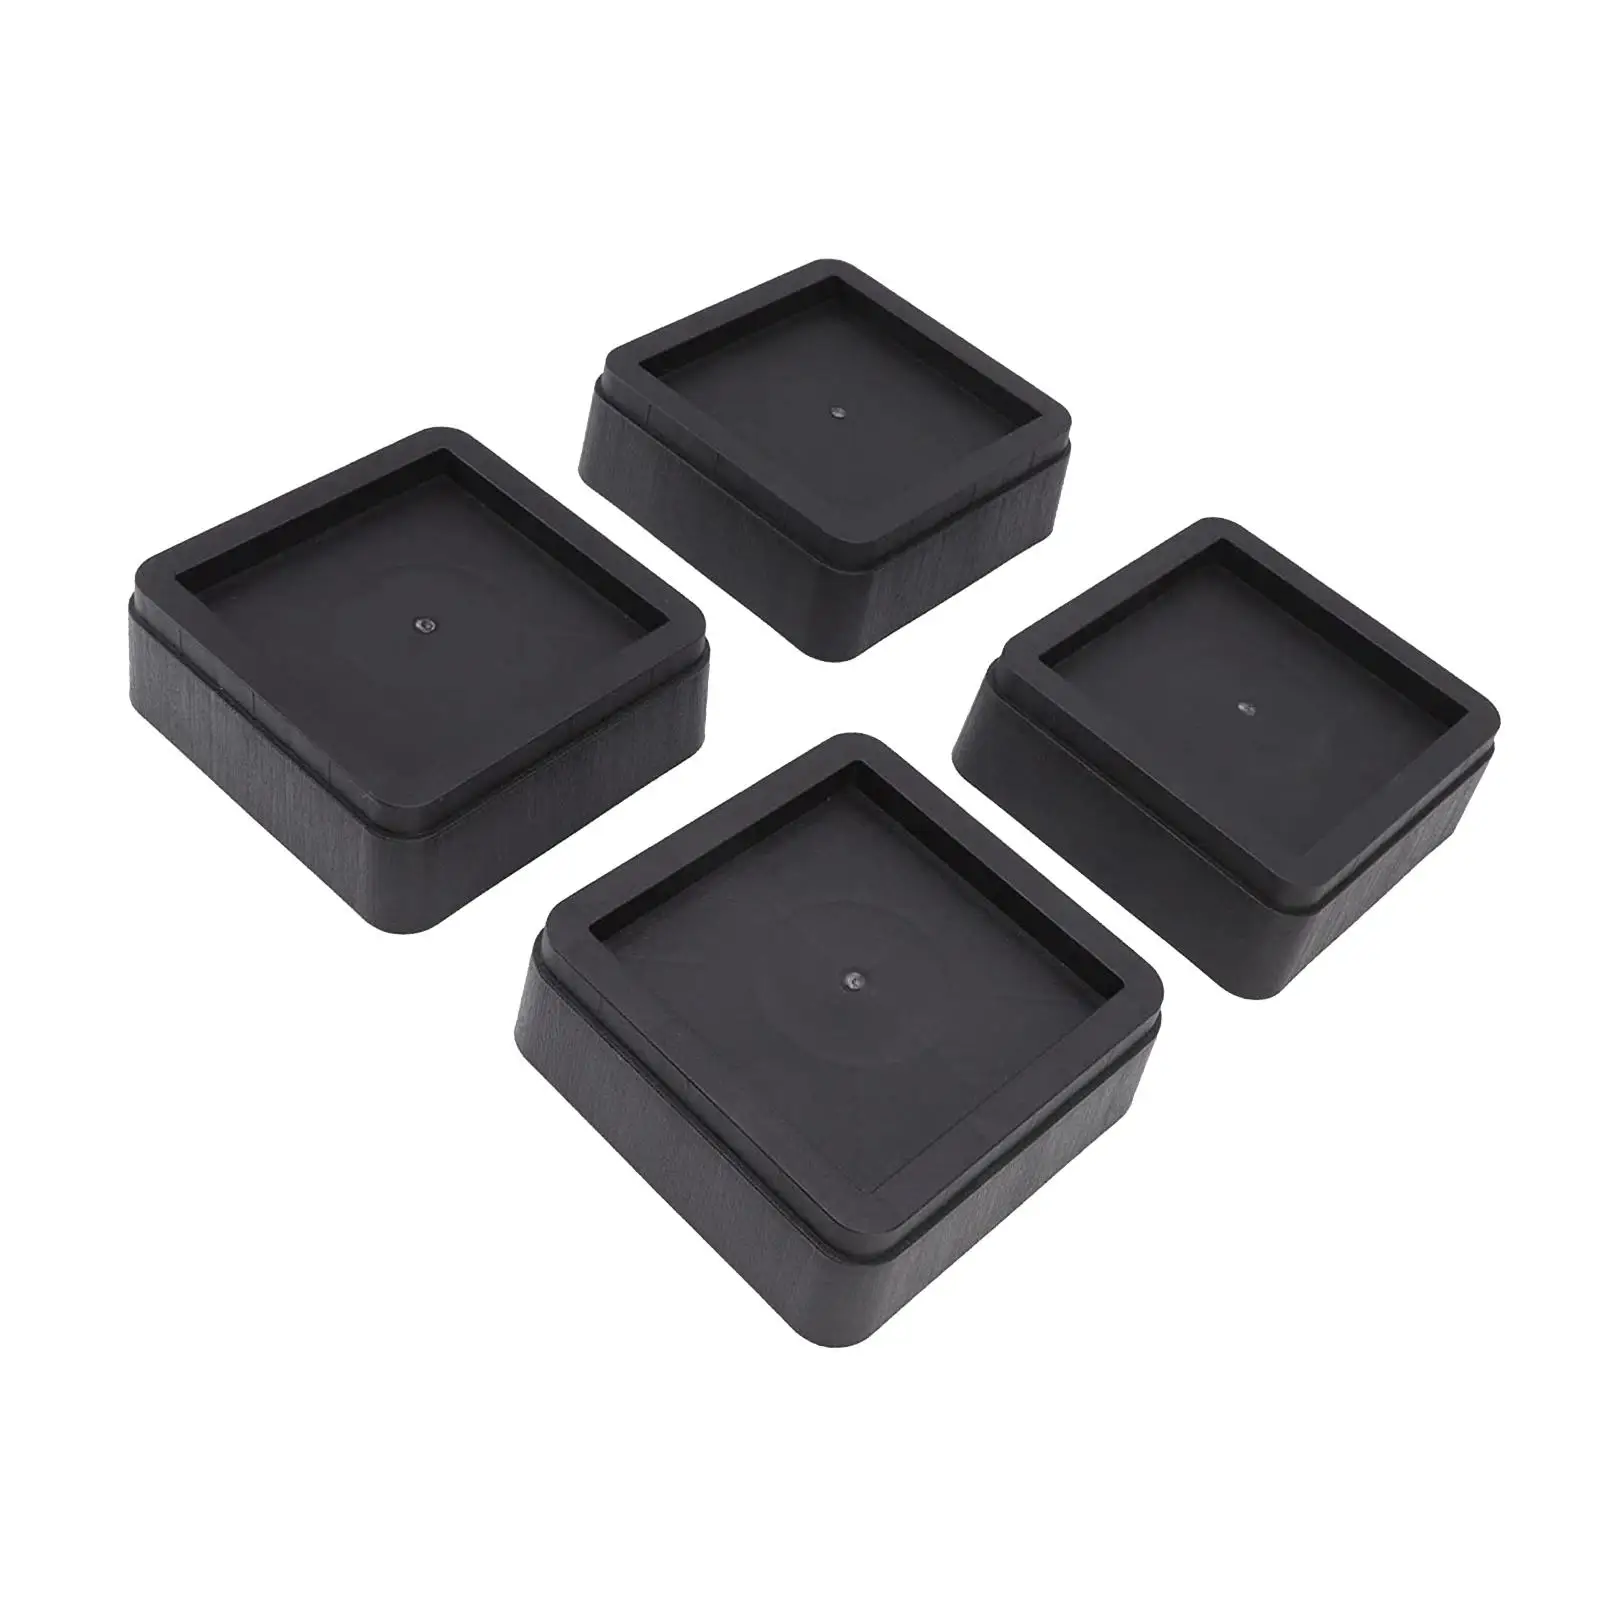 4x Bed Risers Floor Protector Non Slip Fits 5.5 inch Wide Furniture Leg Risers Furniture Pads for Fridge Table Sofa Cabinet Desk